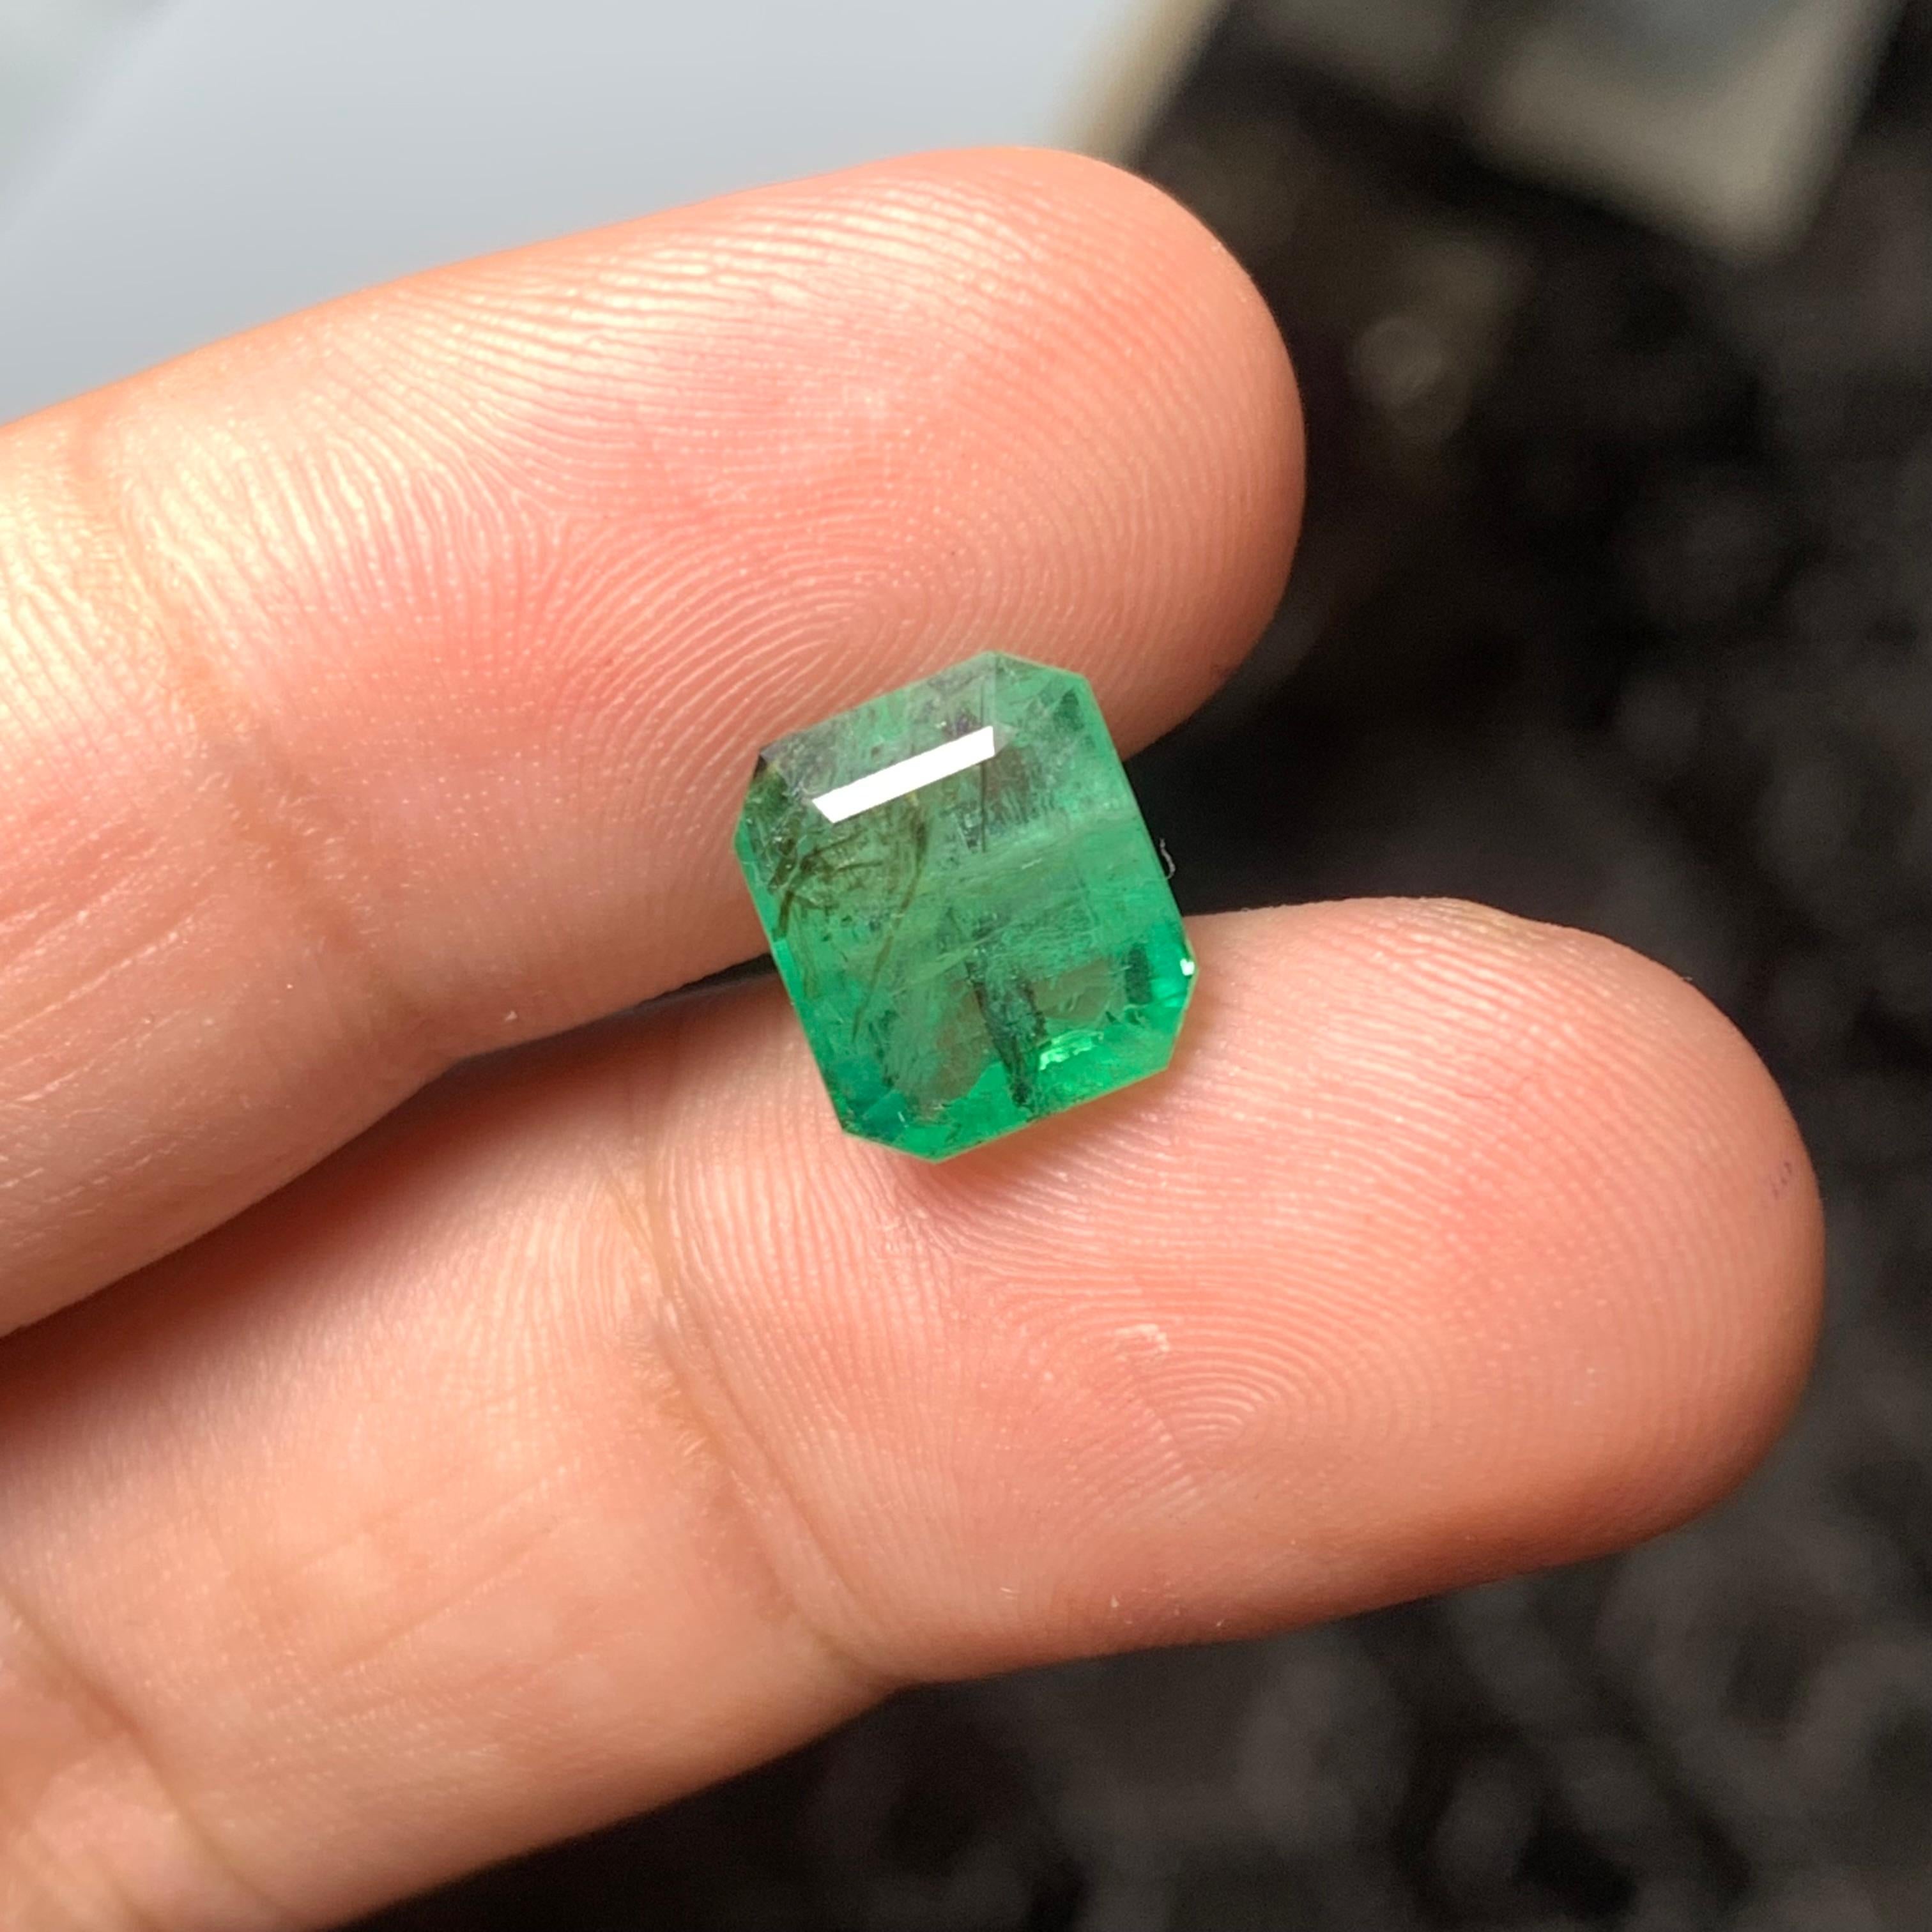 Loose Emerald
Weight: 3.80 Carats
Dimension: 9.9x8.5x5.4 m
Origin: Zambia Mine
Shape: Emerald
Color: Green
Treatment: Non
Certificate: On Demand 
.
Wearing an emerald gives strength to the planet Mercury located in the person's horoscope. It